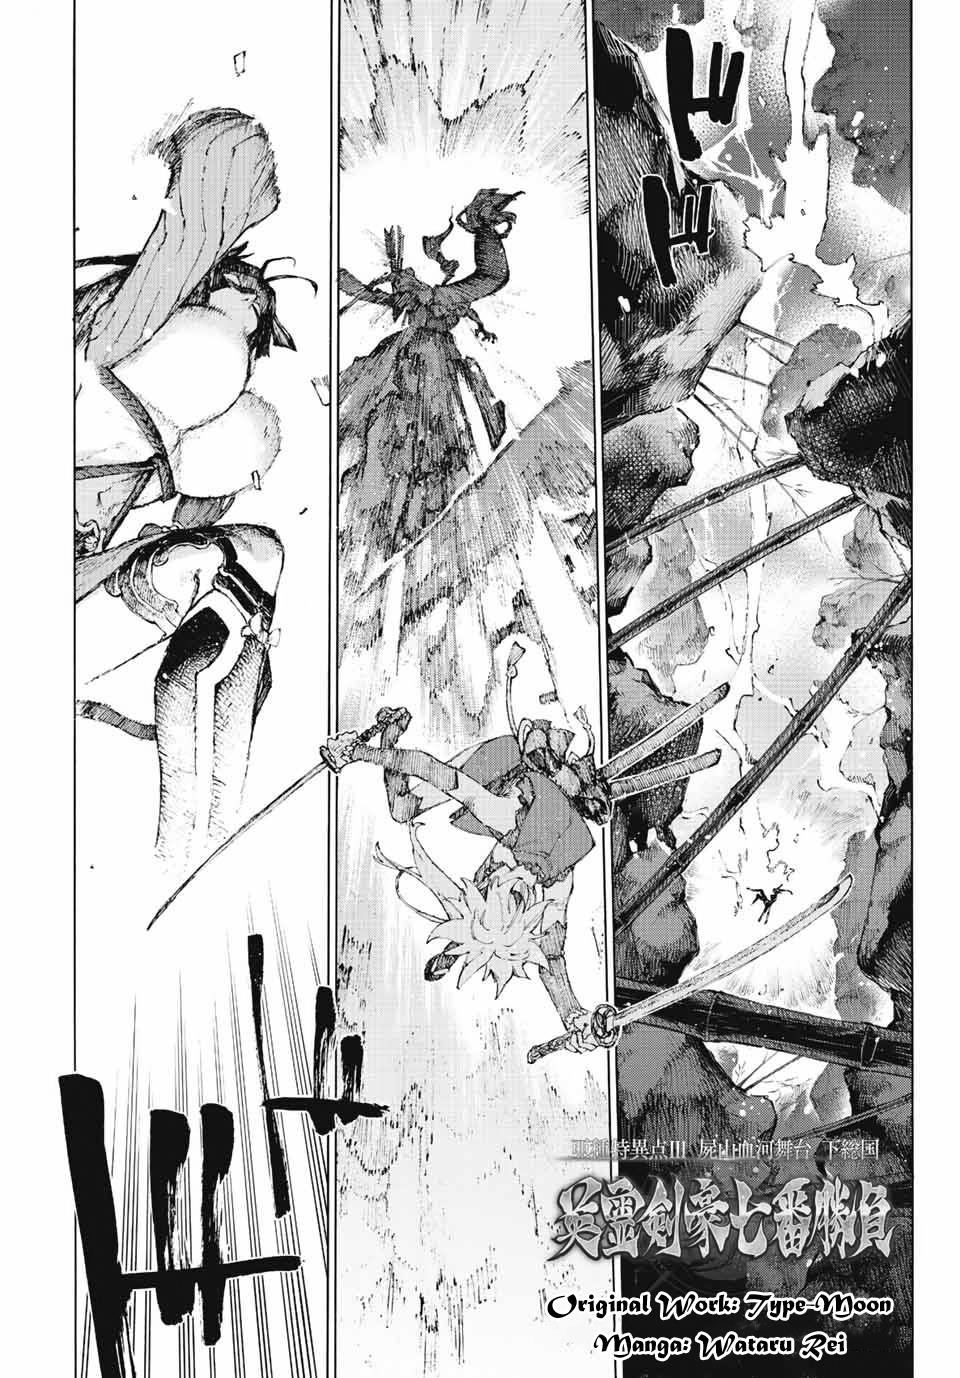 Fate/grand Order -Epic Of Remnant- Pseudo-Singularity Iii: The Stage Of Carnage, Shimousa - Seven Duels Of Swordmasters - Page 1